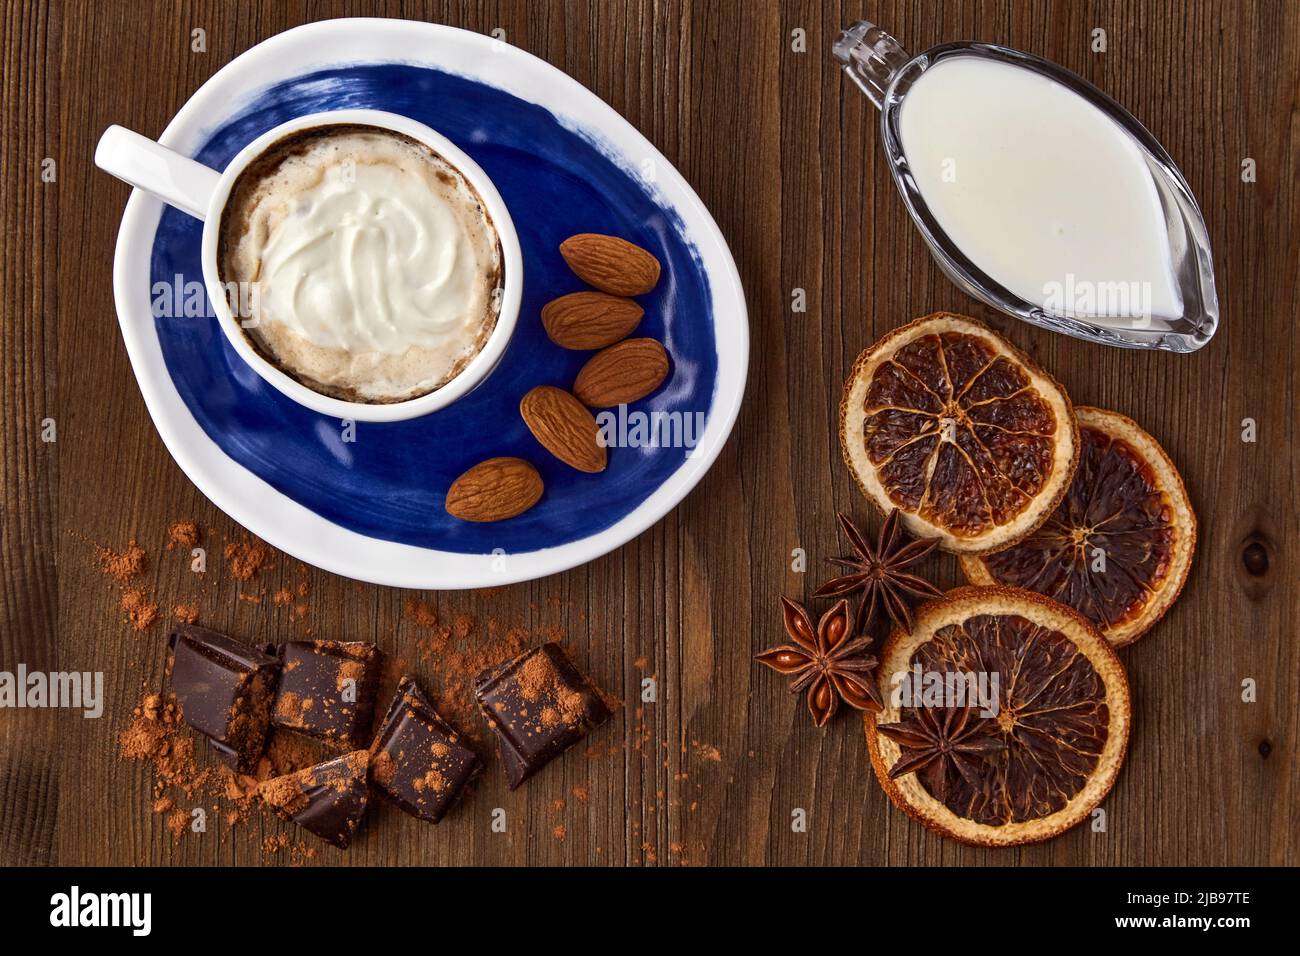 Blue cup of Viennese coffee with cream, chocolate and spices on a dark wooden table. View from above Stock Photo